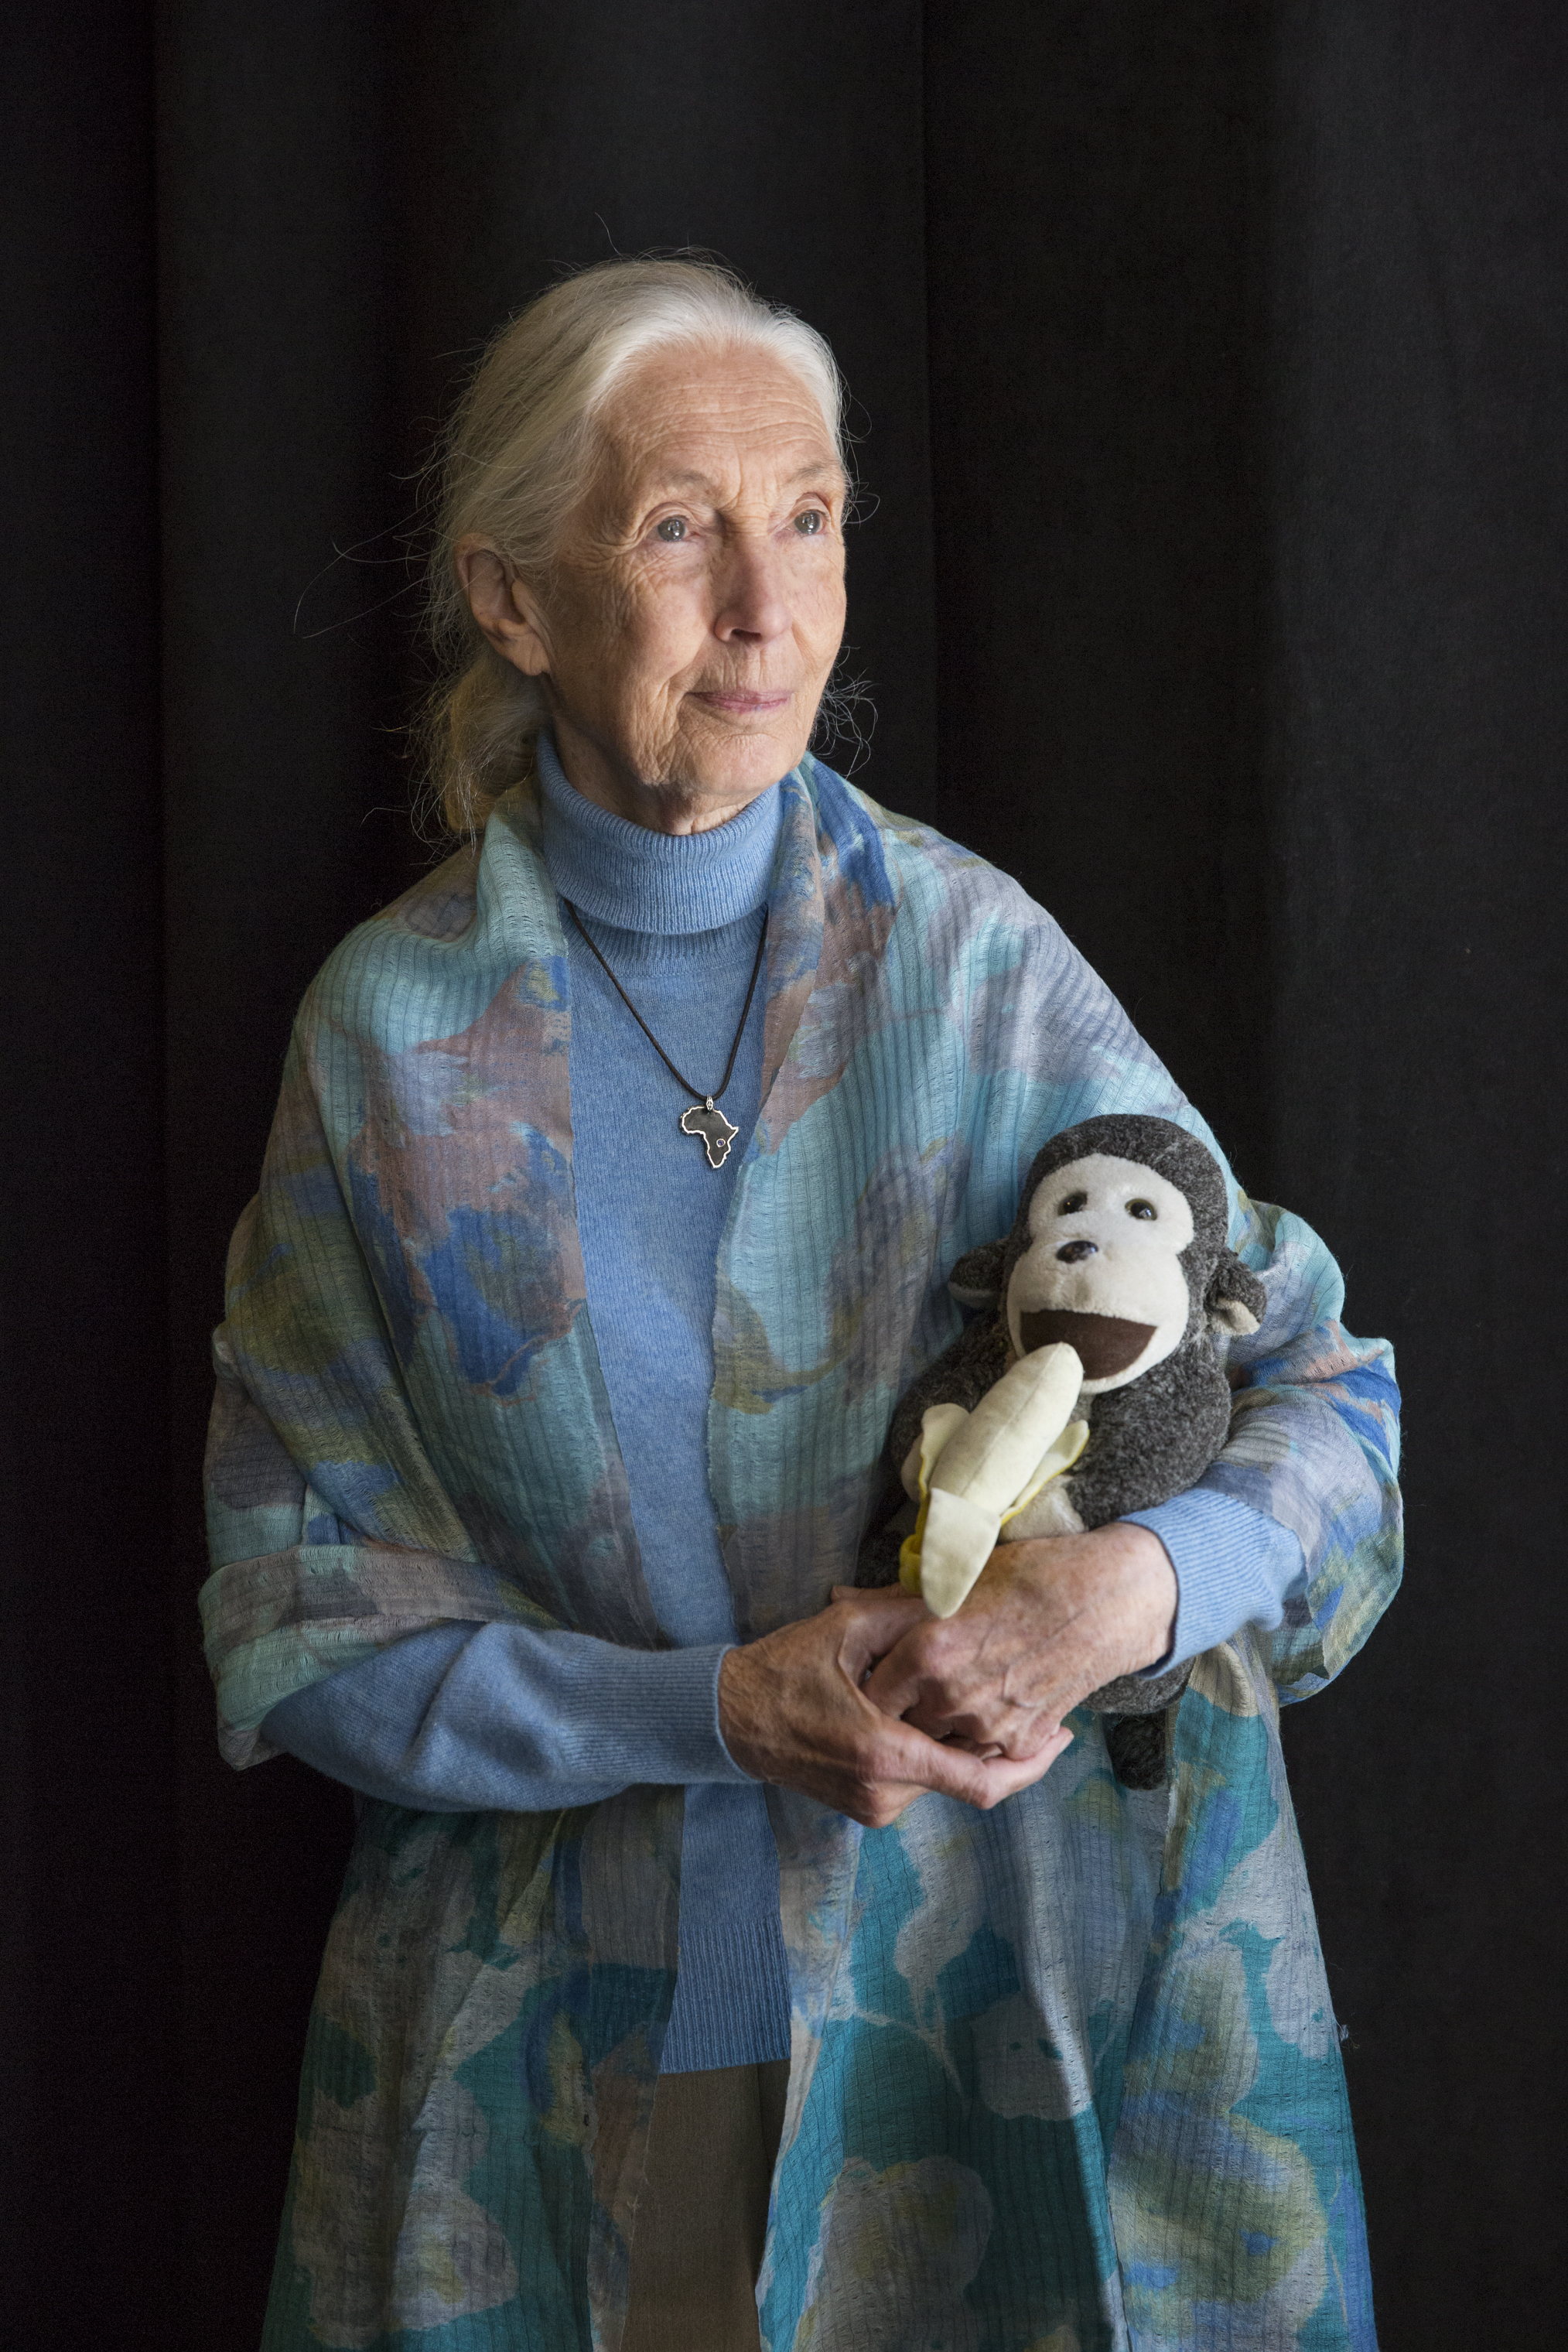 Primatologist Jane Goodall at the TIME 100 Summit in New York on April 23, 2019.